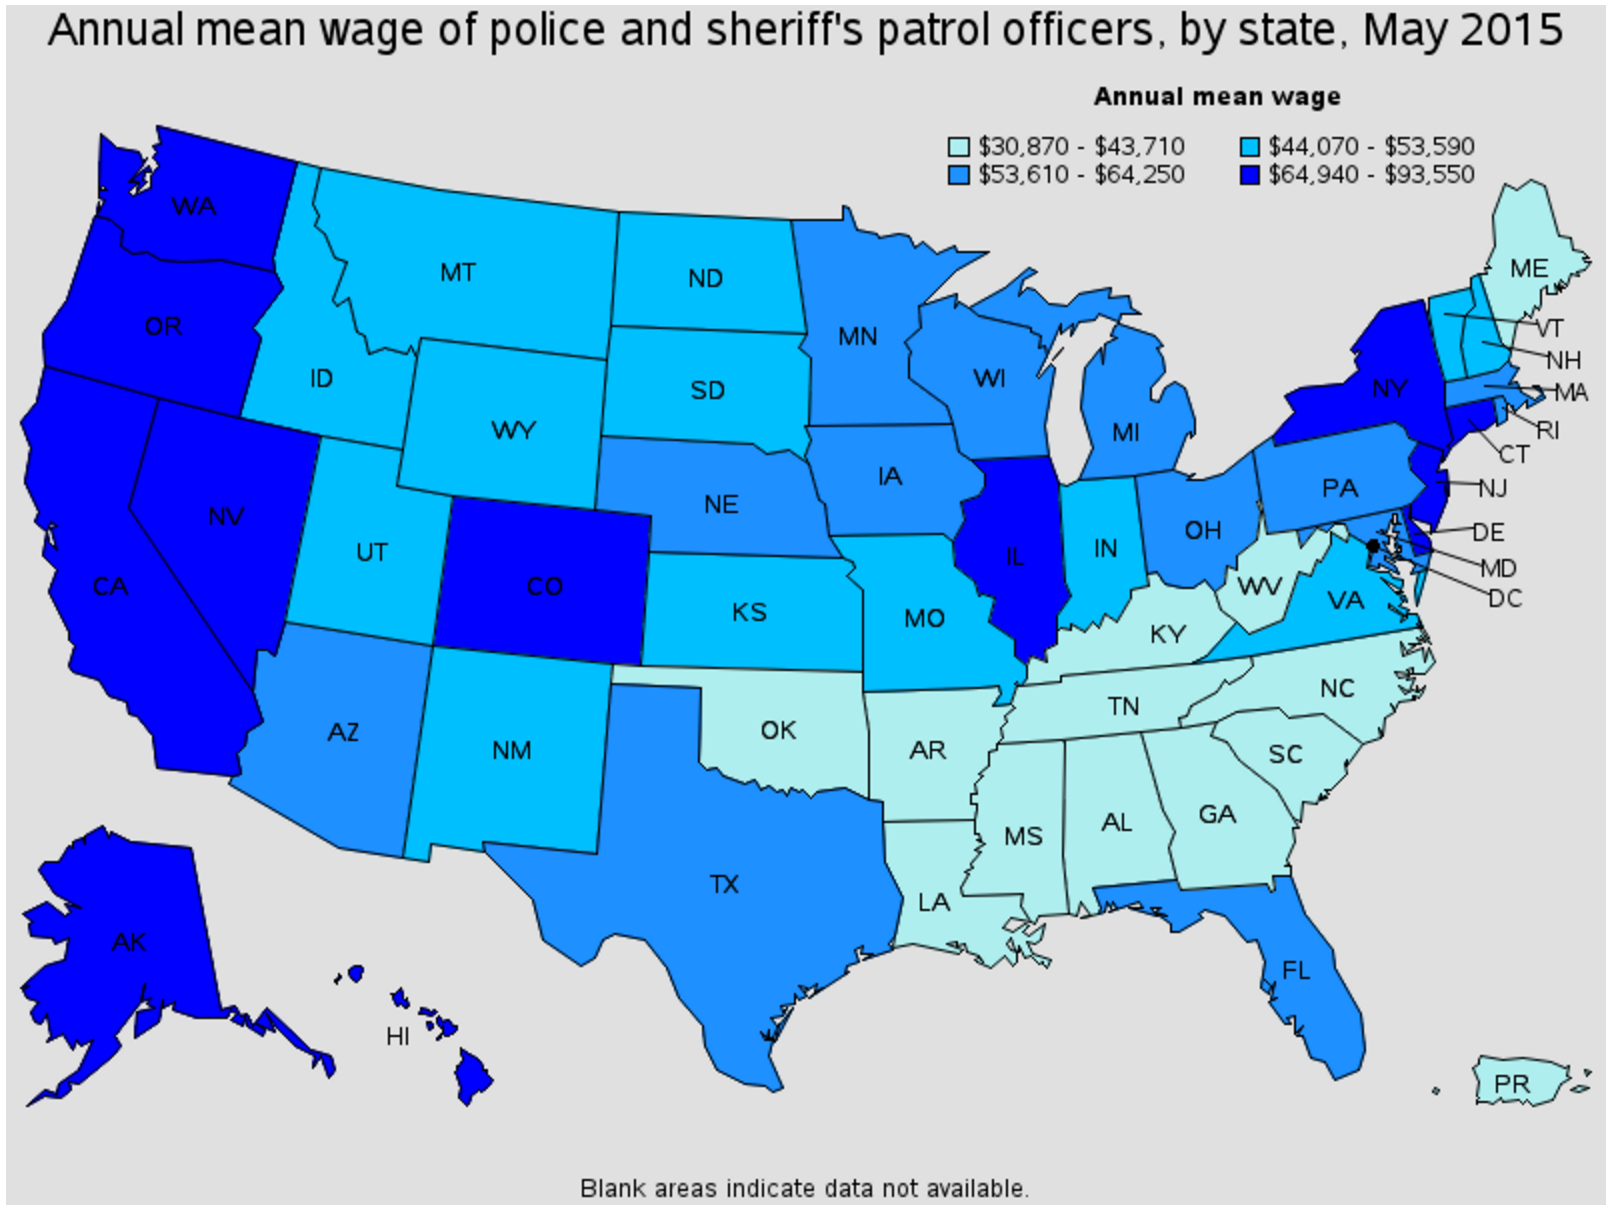 Northridge police officer average salary by state